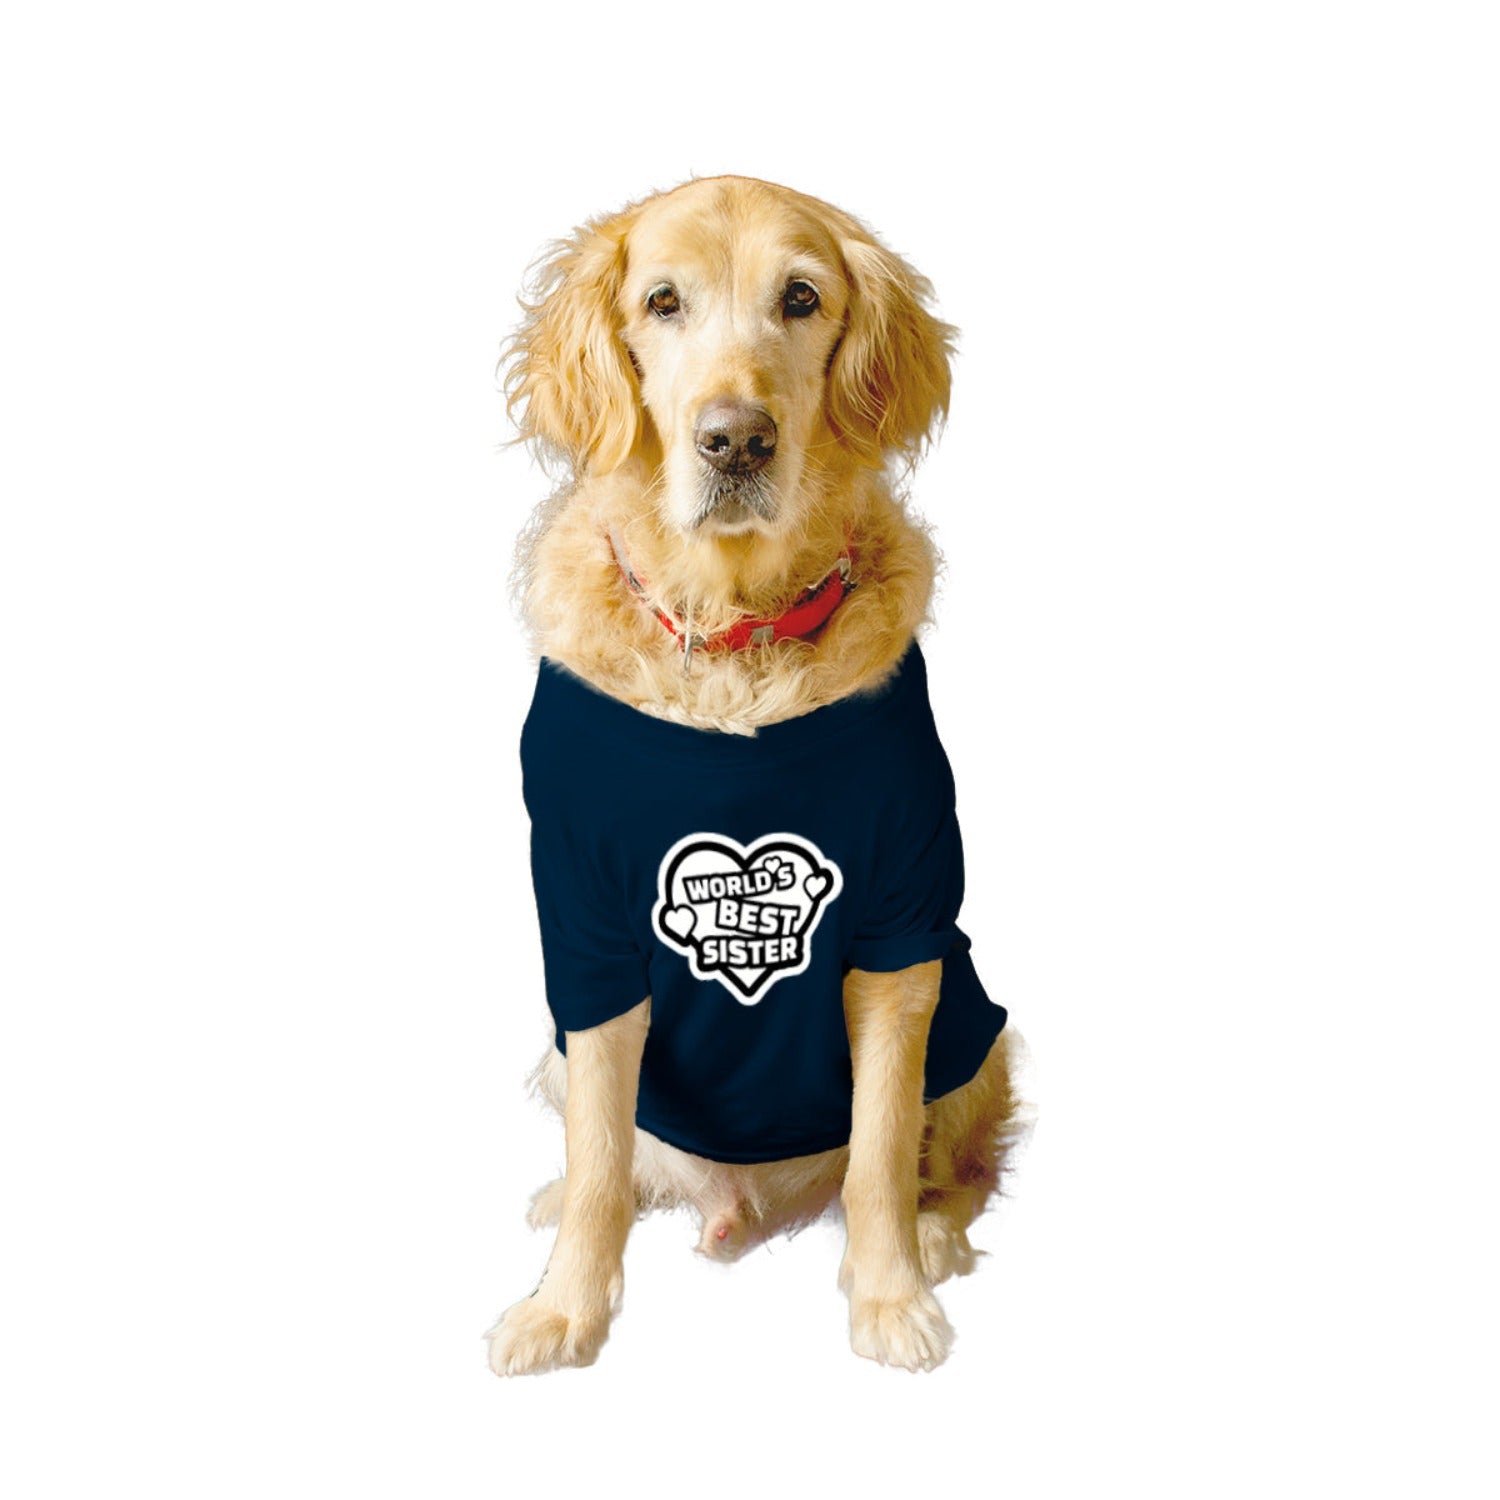 Ruse XX-Small (Chihuahuas, Papillons) / Navy Ruse Basic Crew Neck "World's Best Sister" Printed Half Sleeves Dog Tee